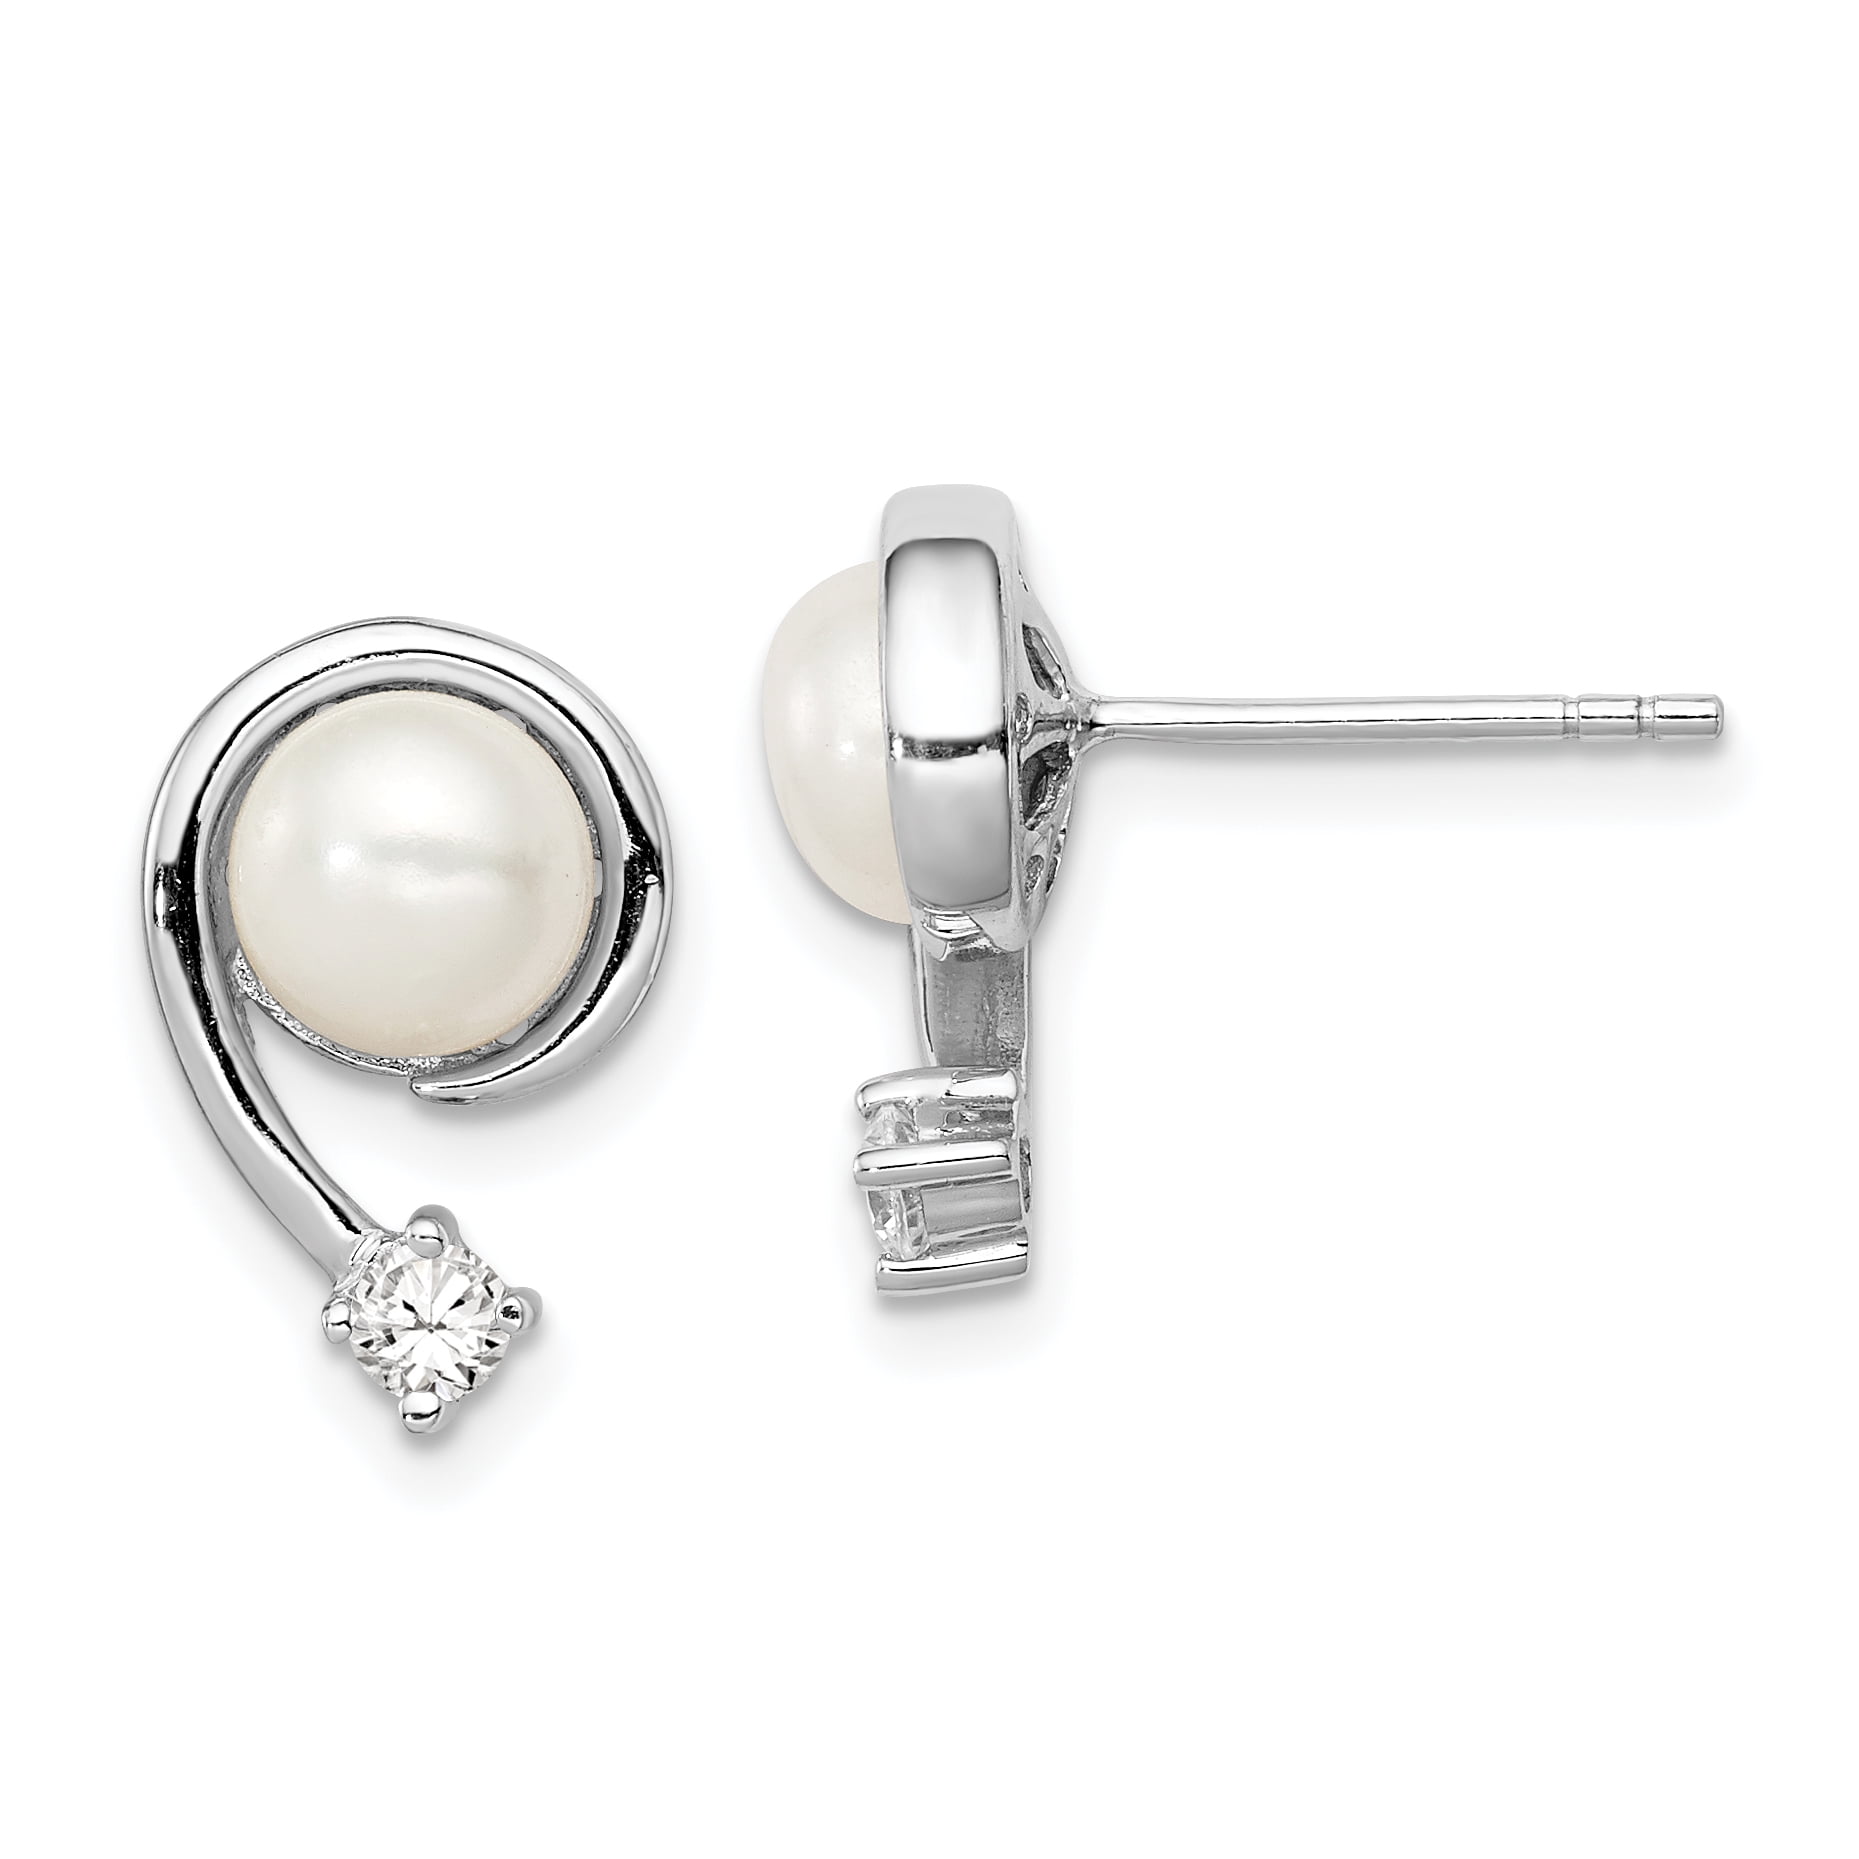 8mm White Button Cultured Pearl Studs ~ 925 Sterling Silver Solitaire Earrings